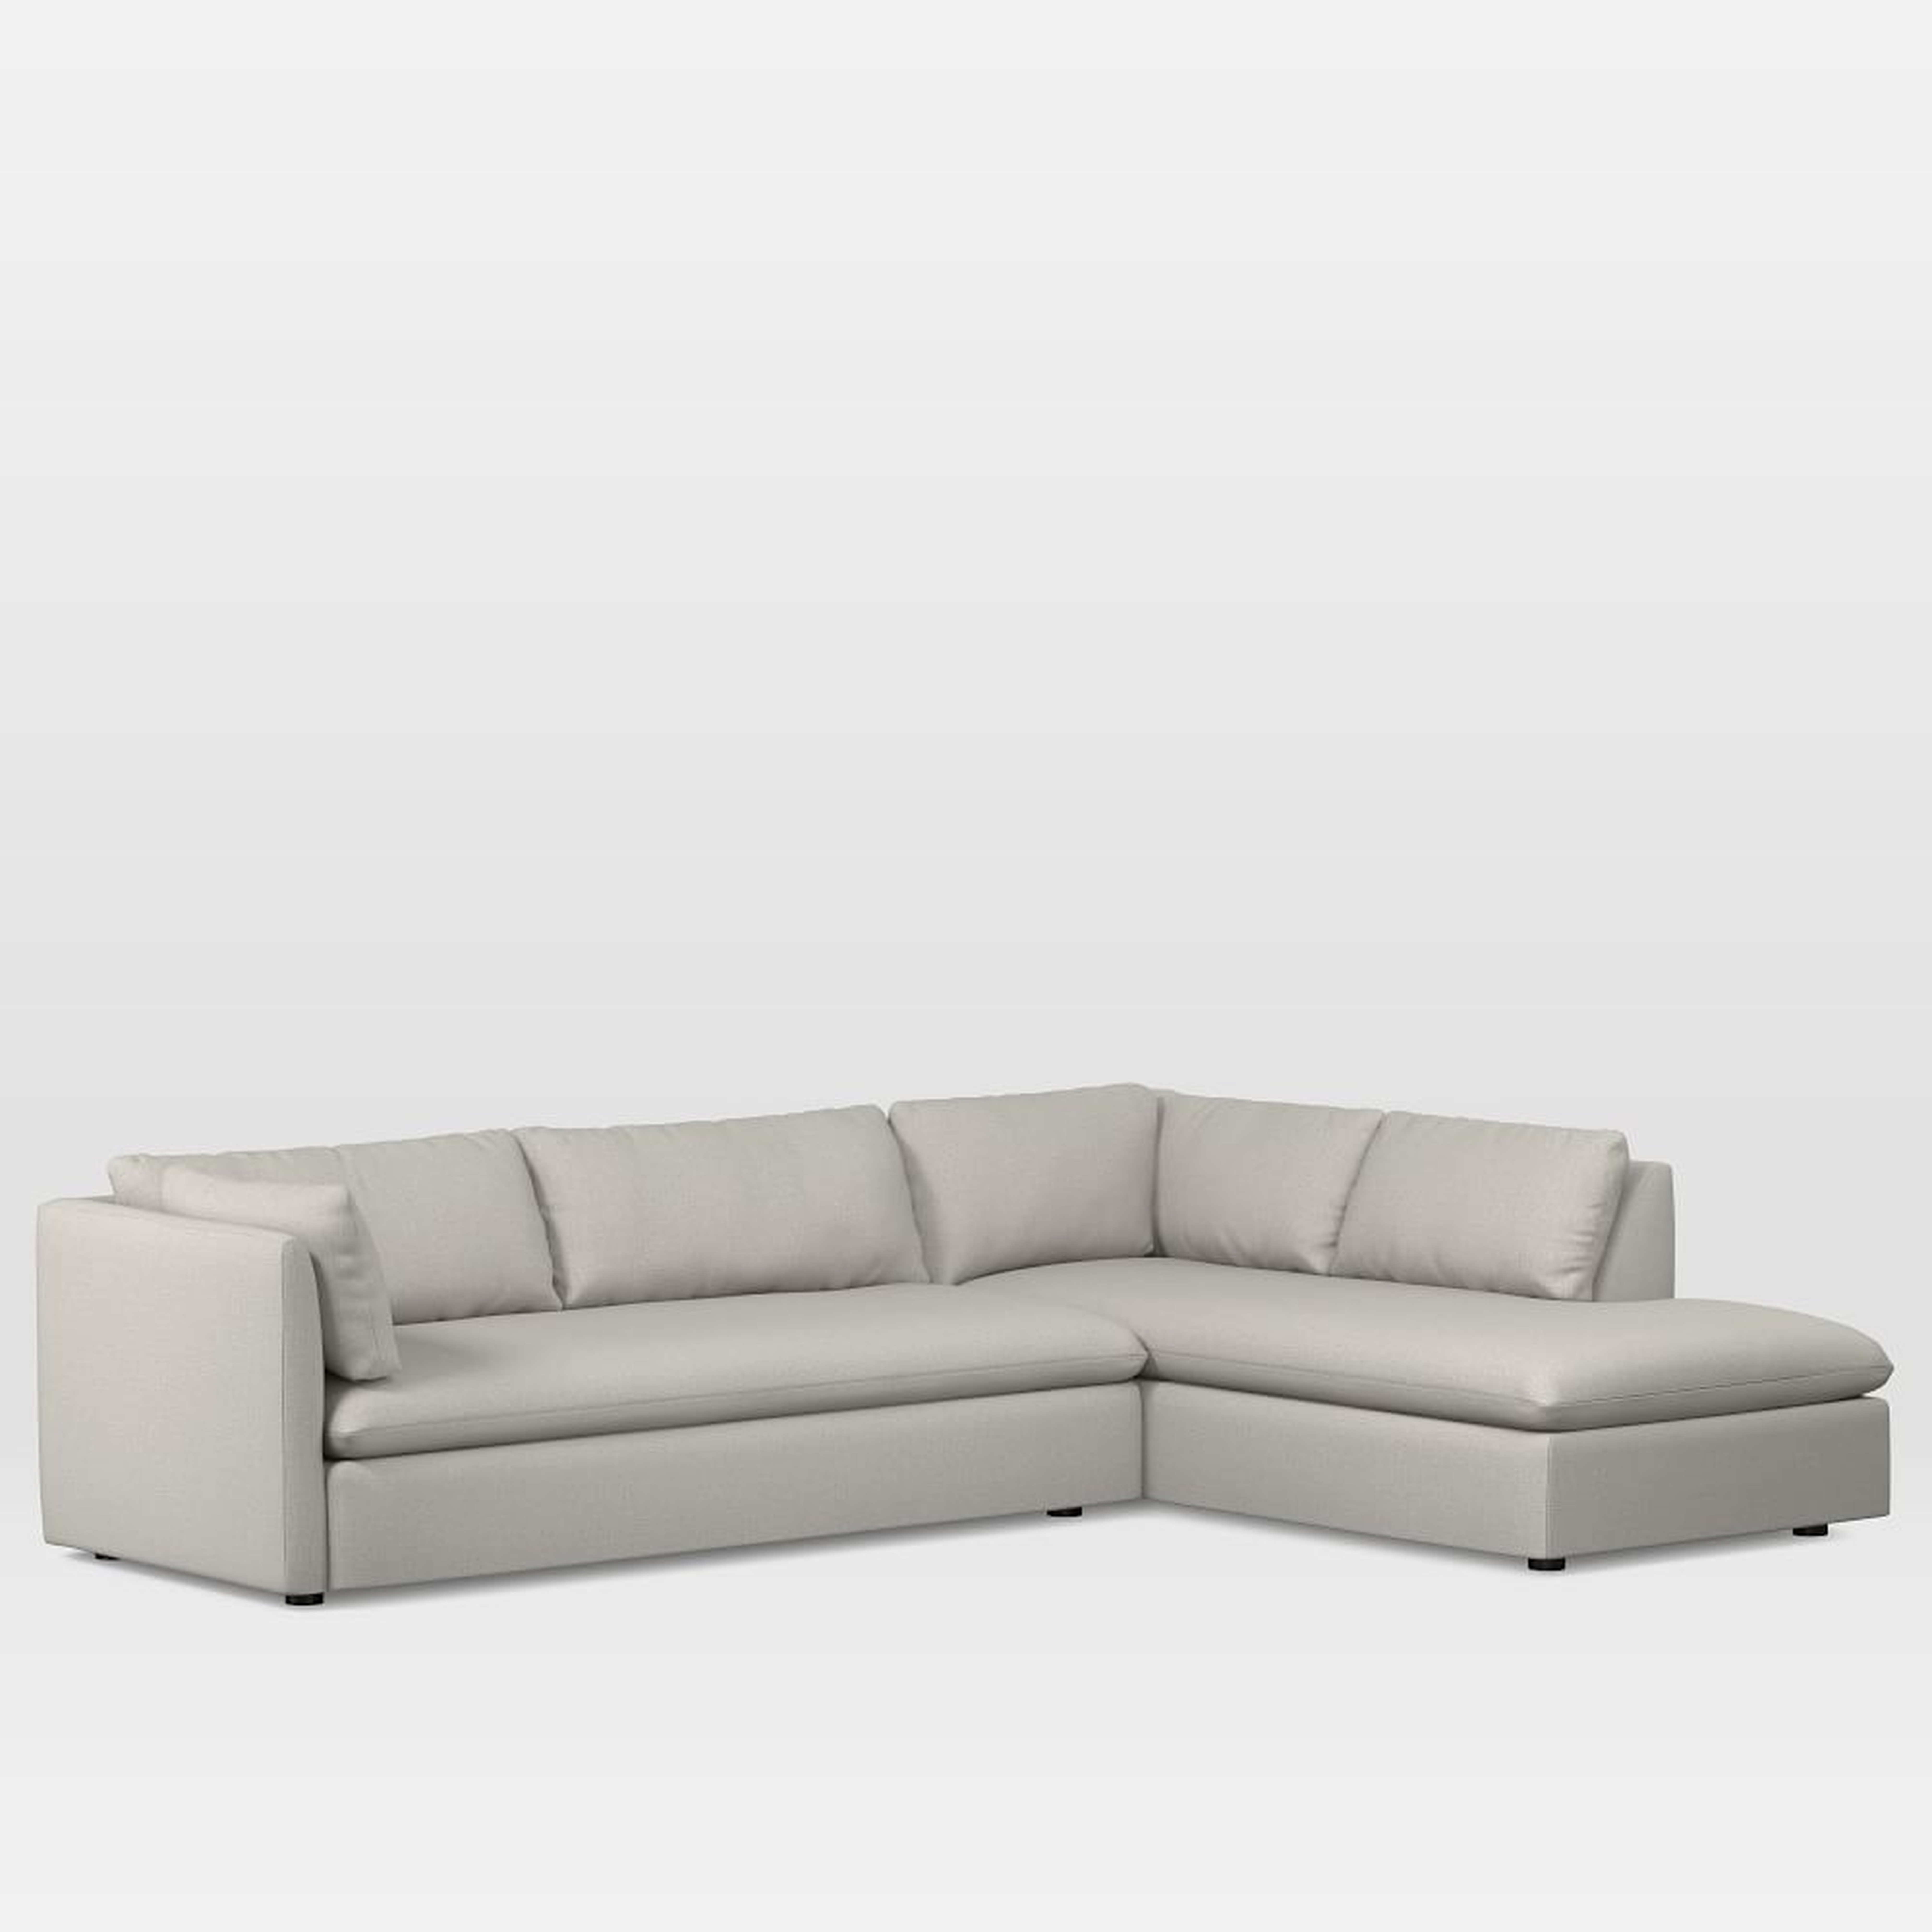 Shelter 106" Right 2-Piece Bumper Chaise Sectional, Yarn Dyed Linen Weave, Frost Gray - West Elm